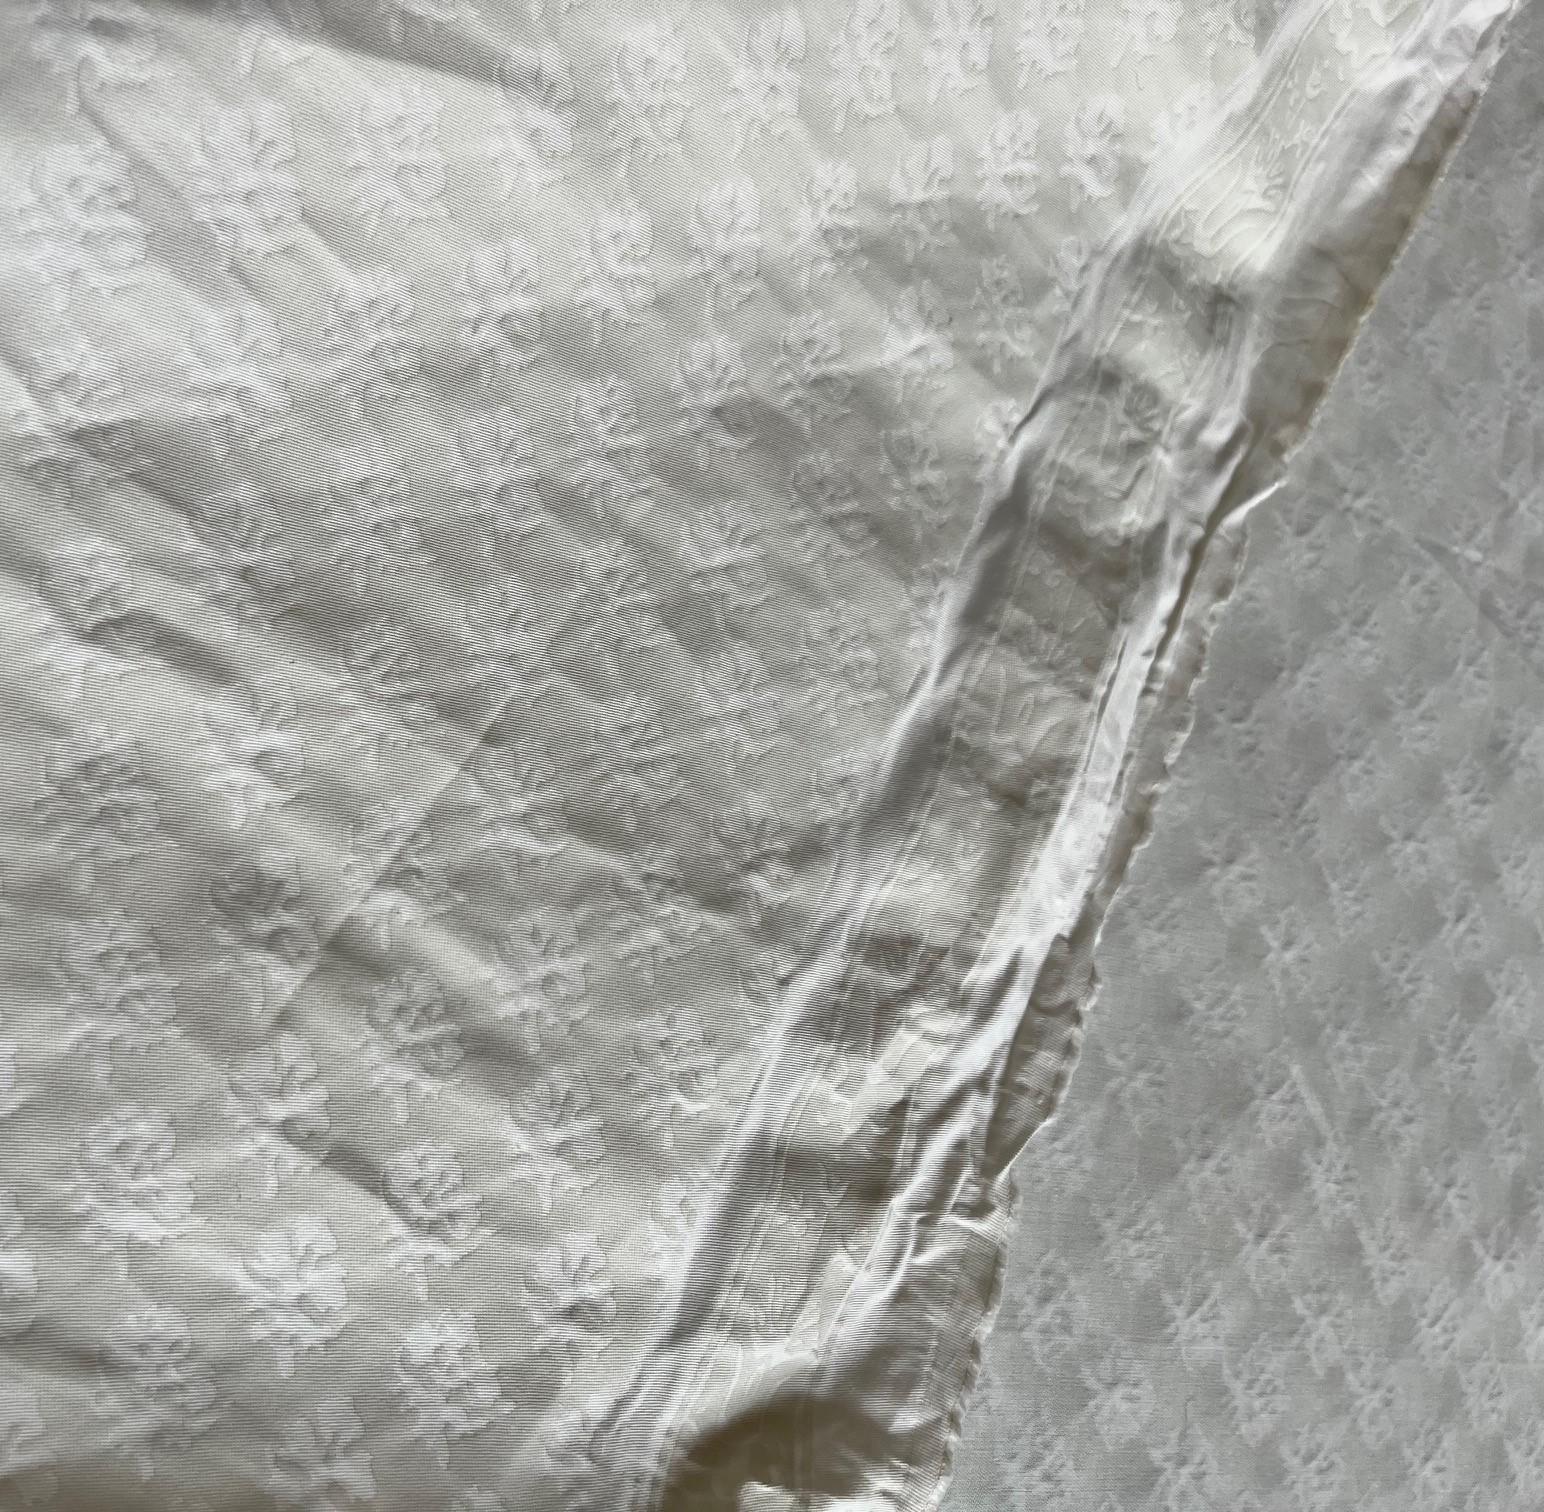 Hand-Crafted Venetian Fortuny Persiano Fabric in White on White, 2 Yards For Sale